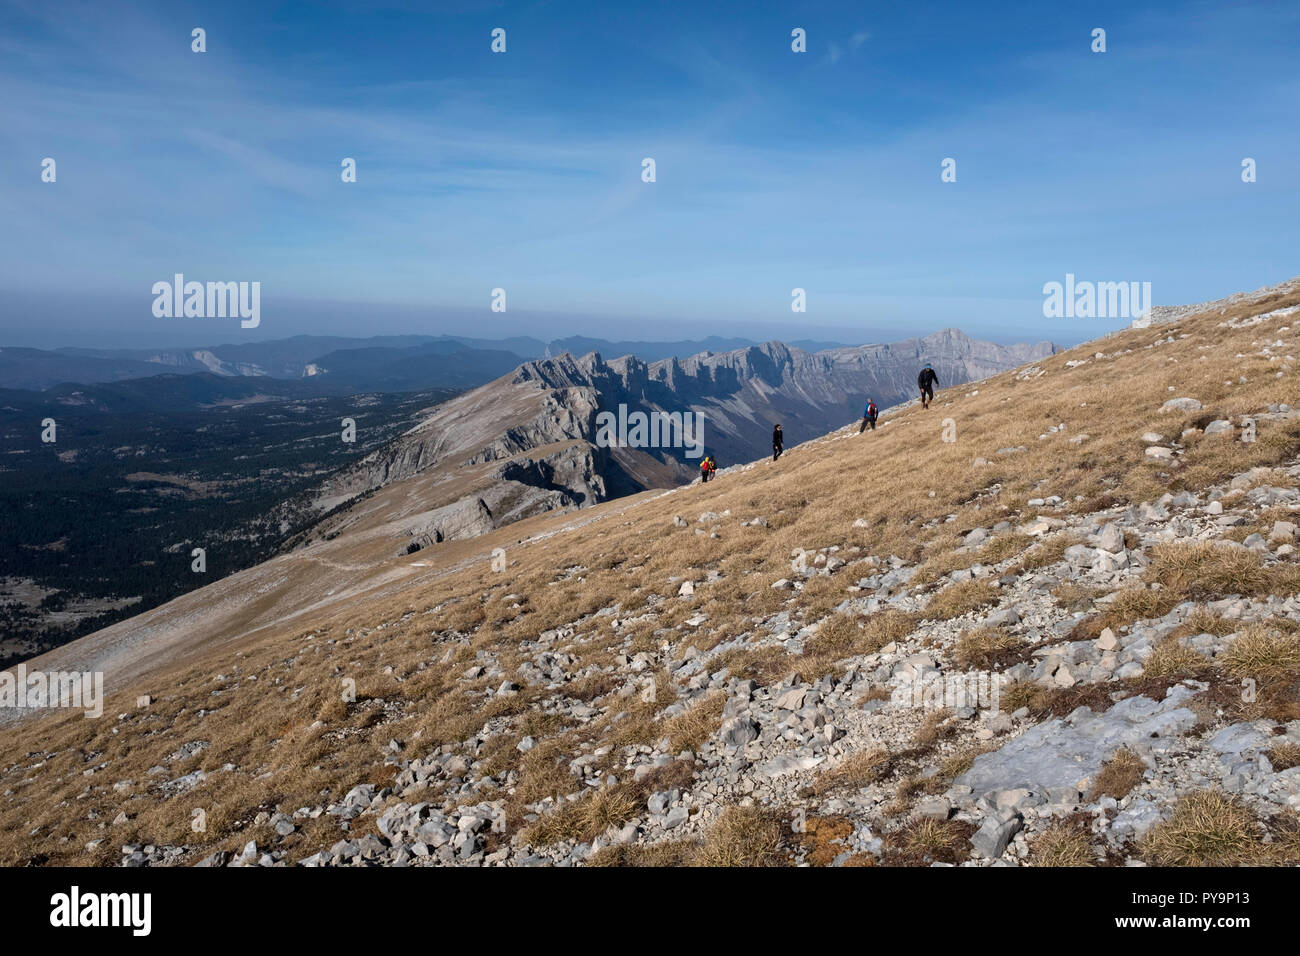 Gresse-en-Vercors (south-eastern France). Group of hikers on the Grand Veymont hills in the Vercors Massif, in the Isere department, with the Vercors  Stock Photo